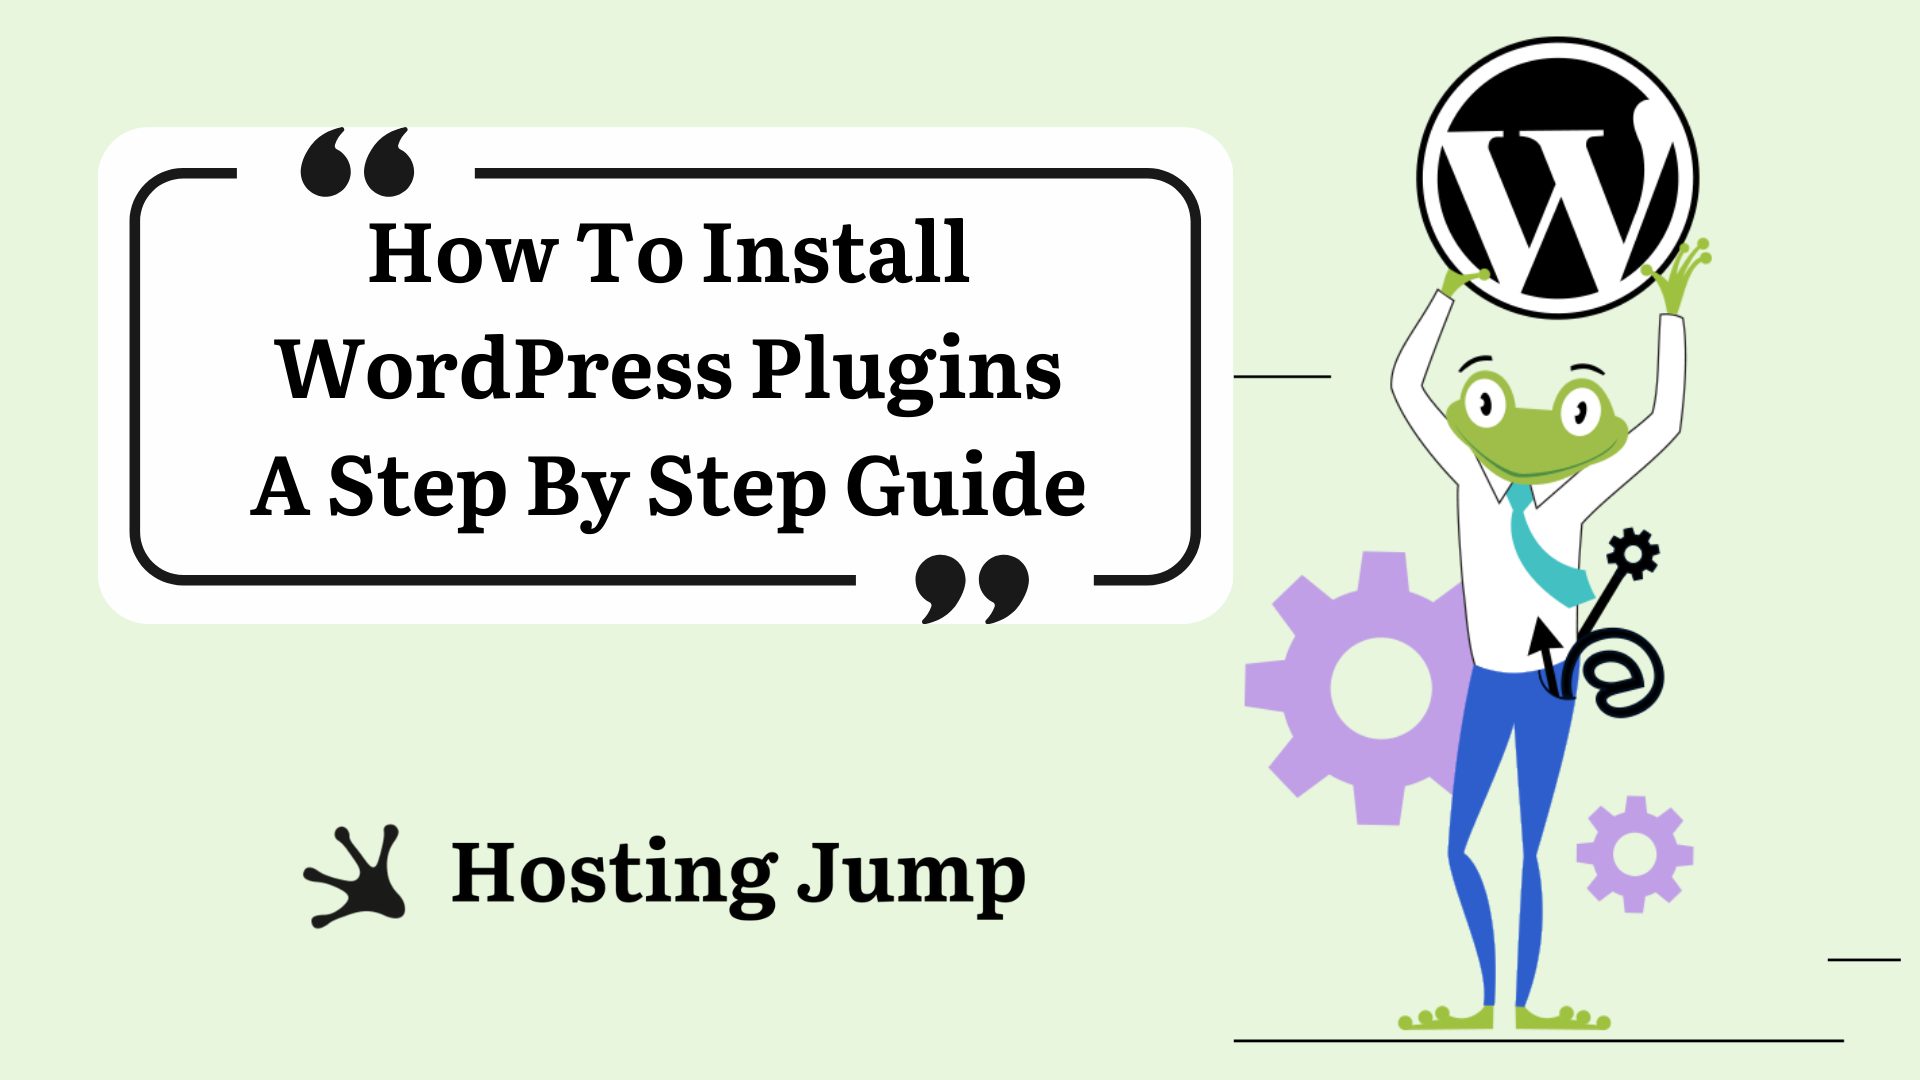 How To Install WordPress Plugins - A Step By Step Guide